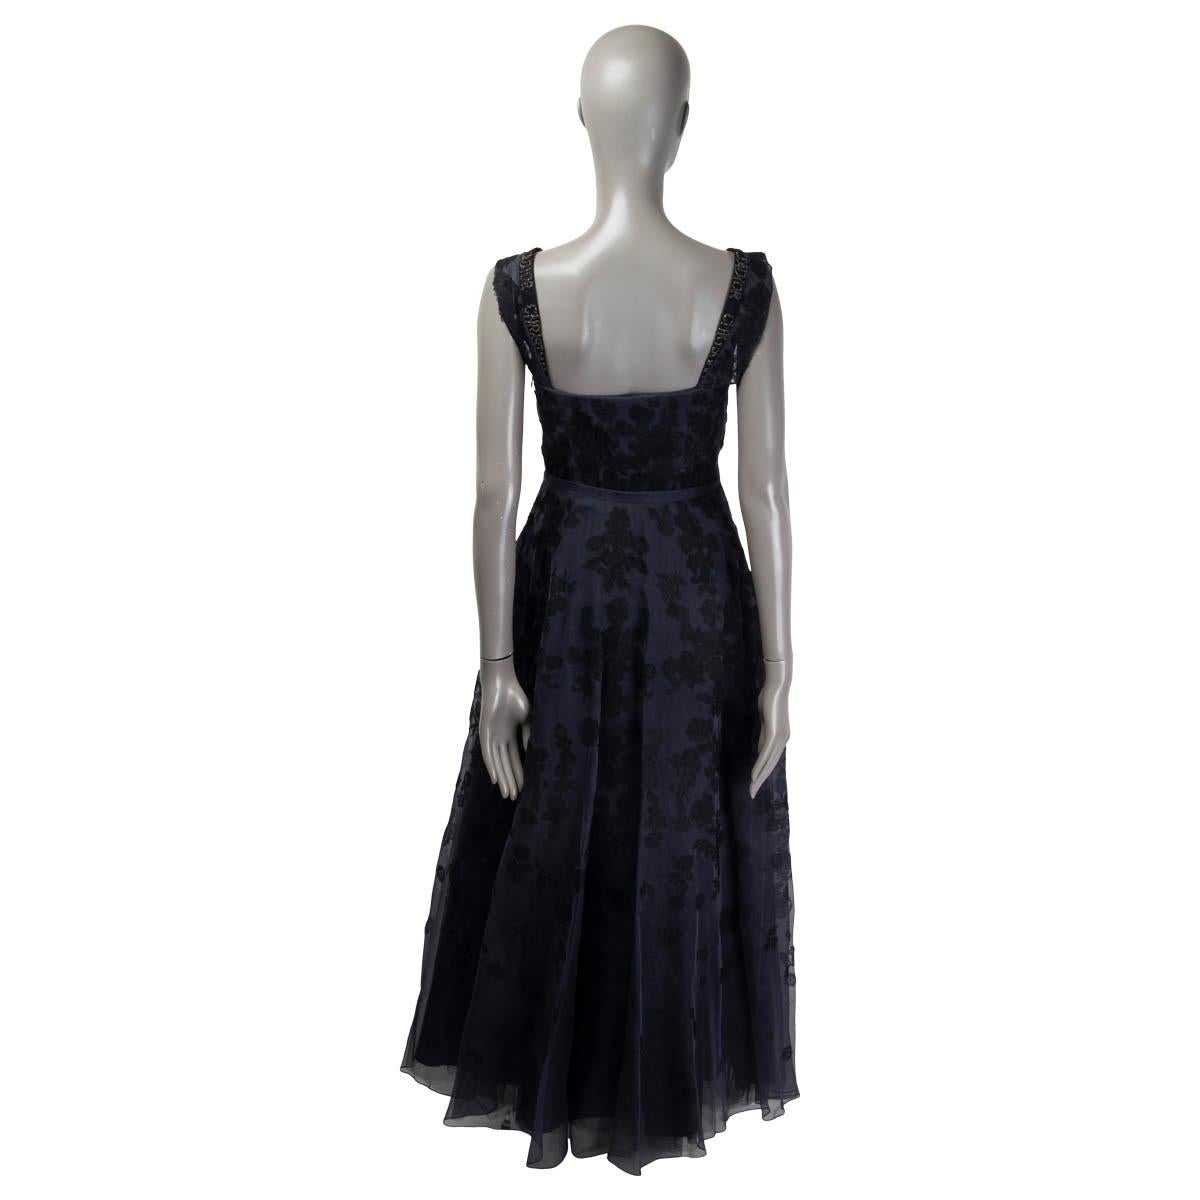 Black CHRISTIAN DIOR navy blue silk 2017 EMBROIDERED BELTED EVENING GOWN Dress 38 S